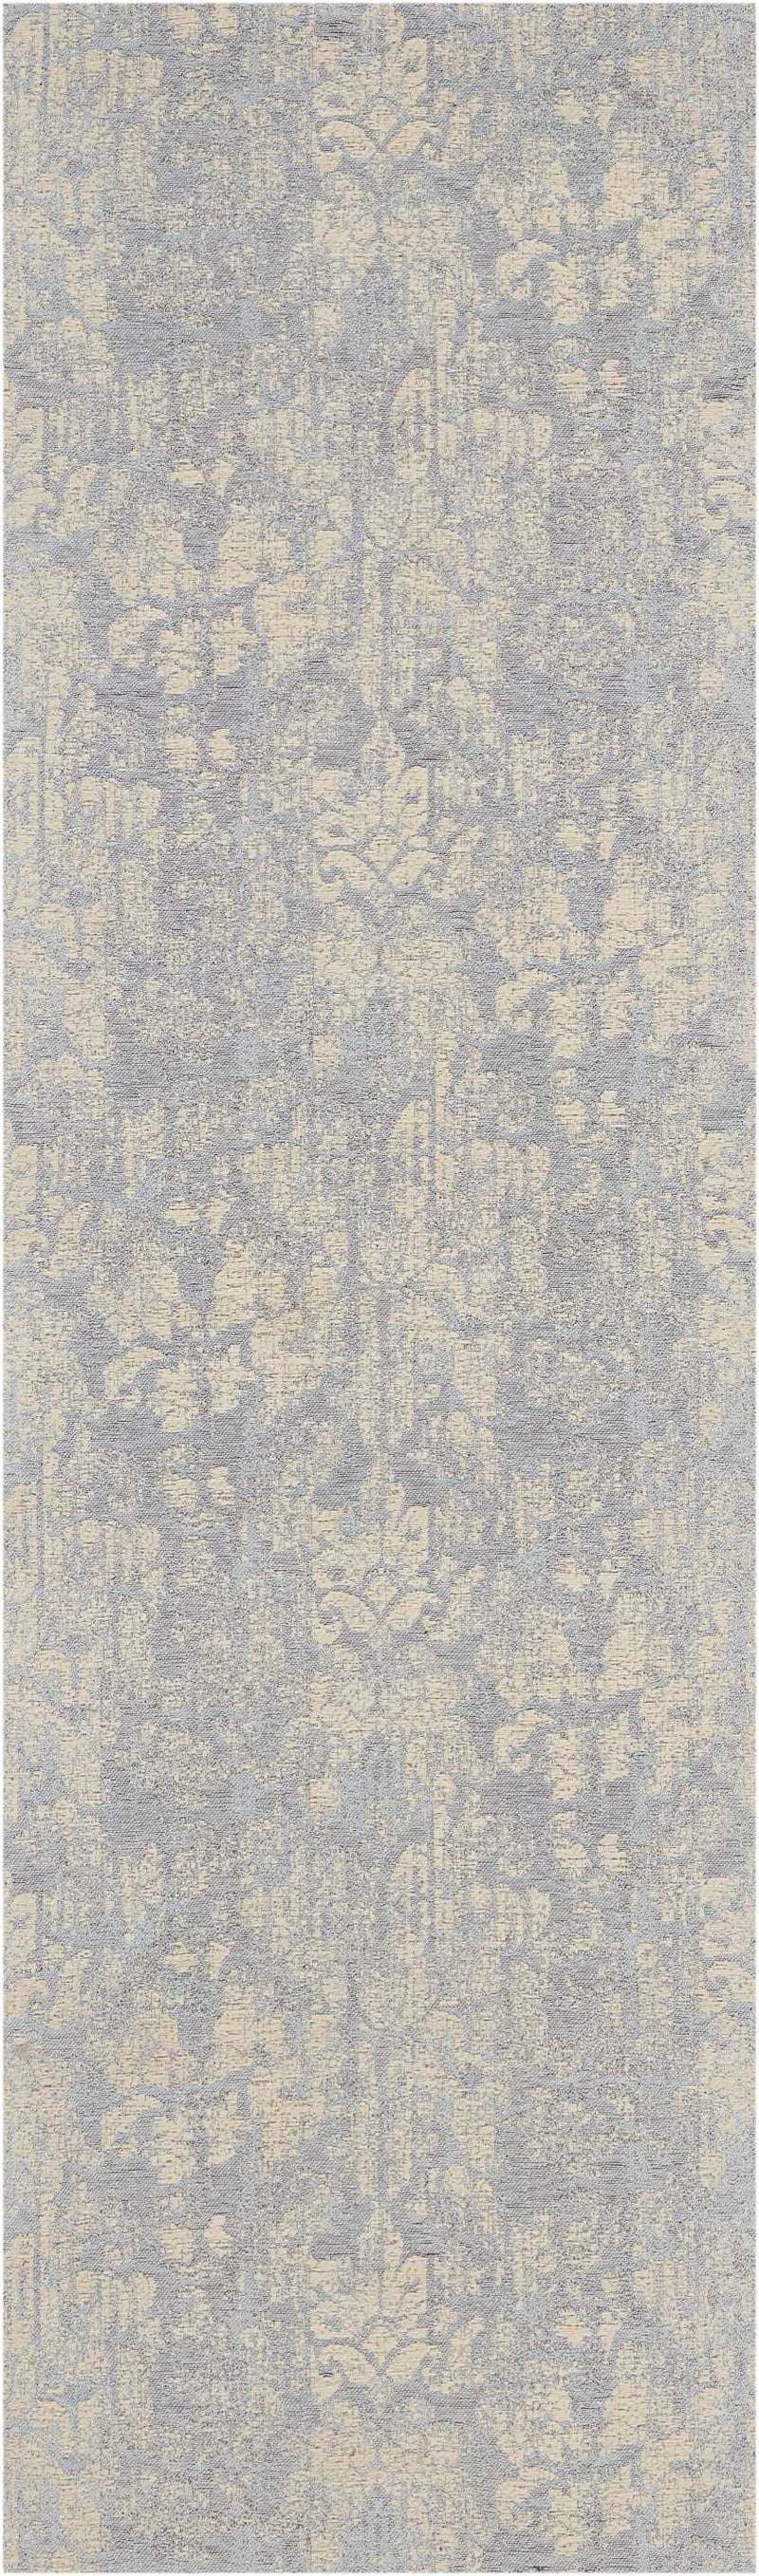 media image for vintage lux mist rug by waverly nsn 099446391773 2 287